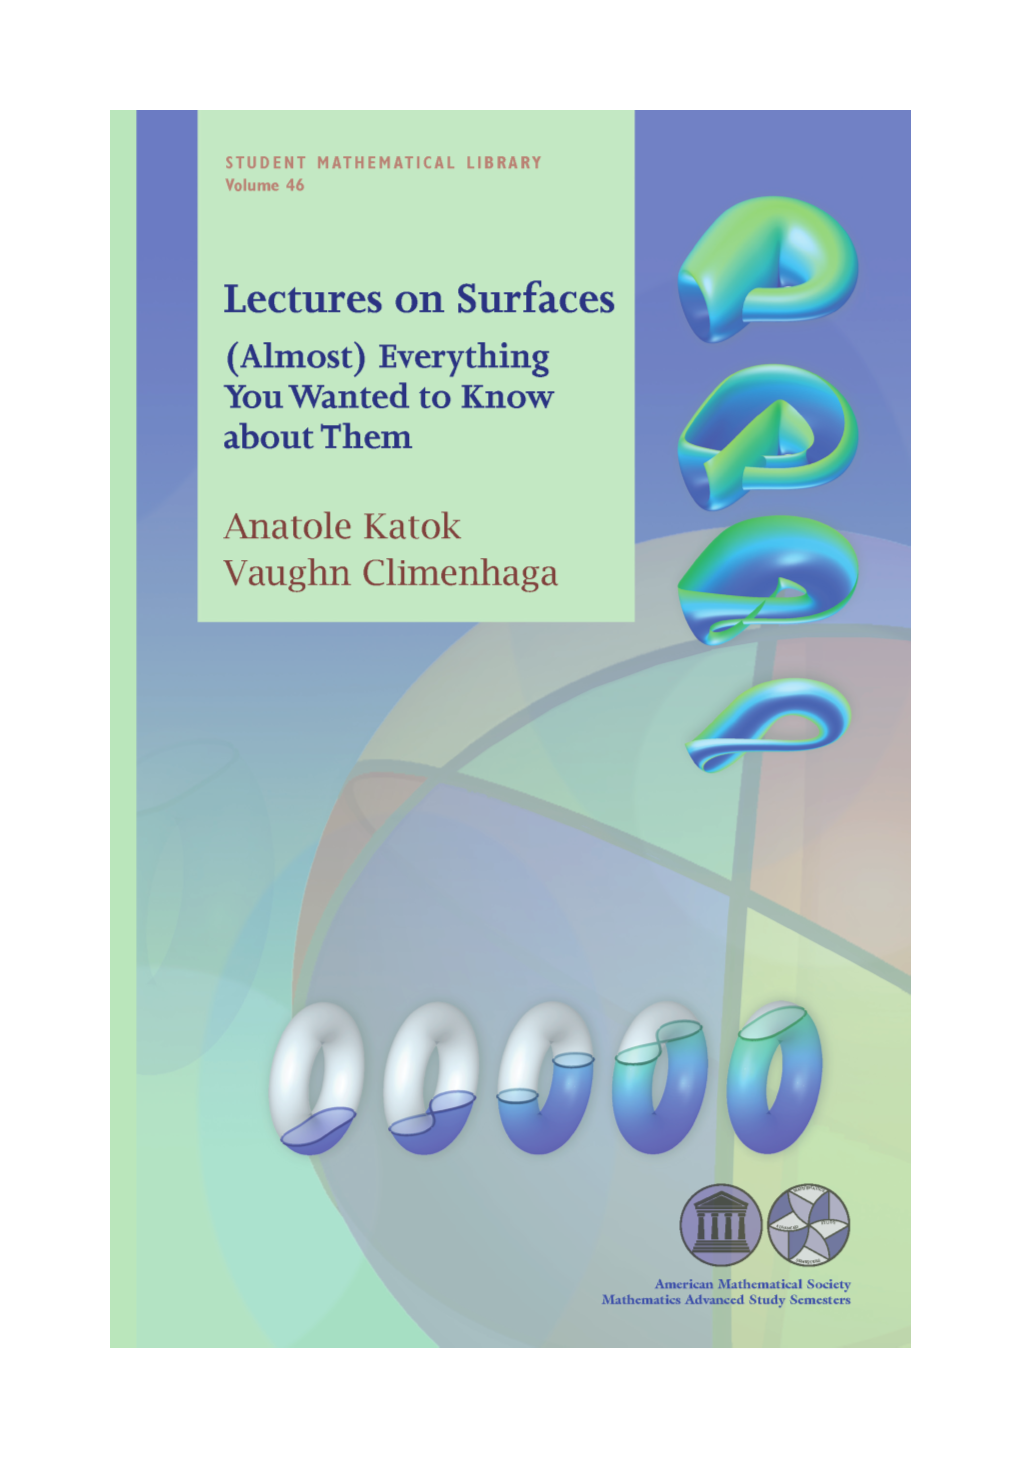 Lectures on Surfaces (Almost) Everything You Wanted to Know About Them